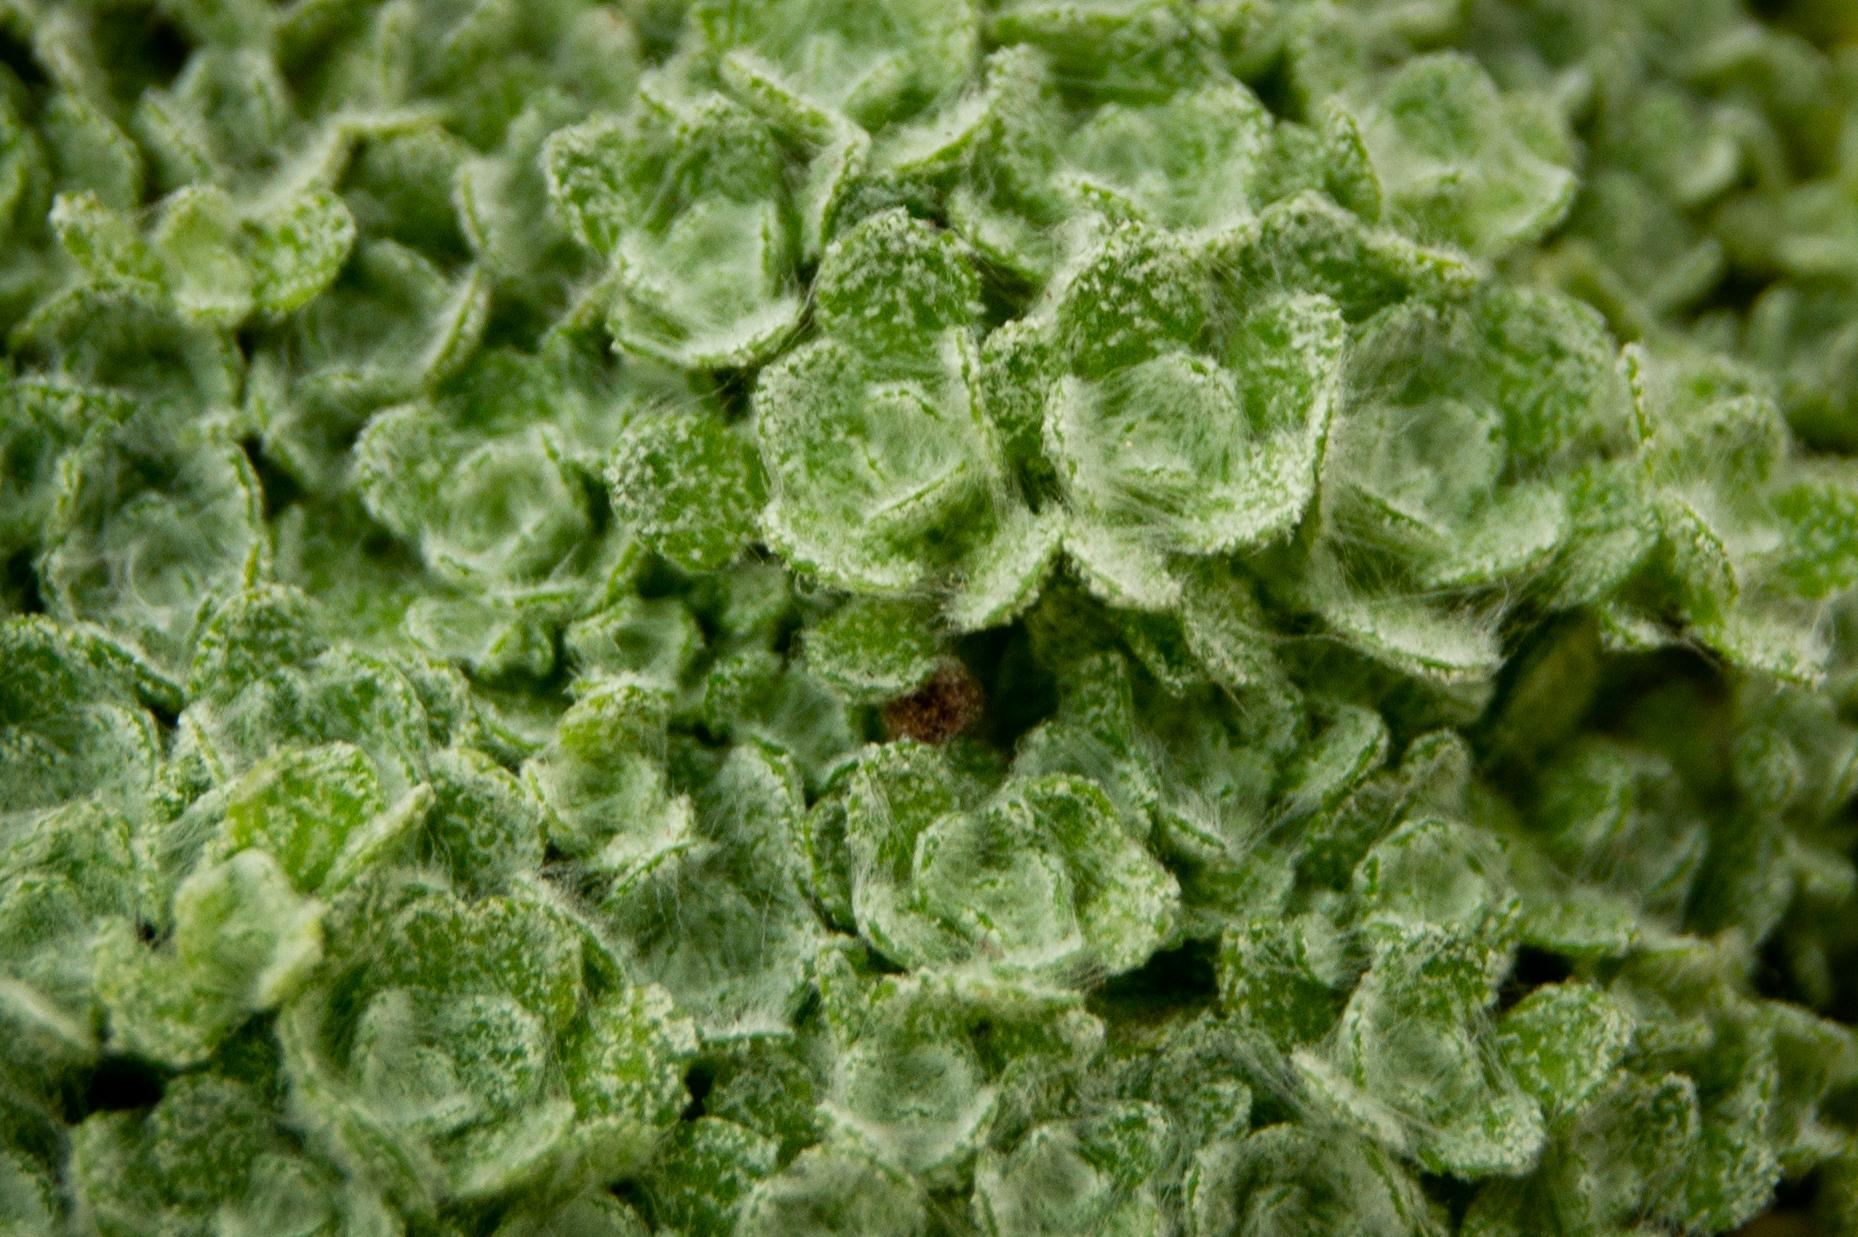 Dionysia tapetodes is an alpine plant with leaves covered in woolly farina. Image by Matthieu Bourdon .